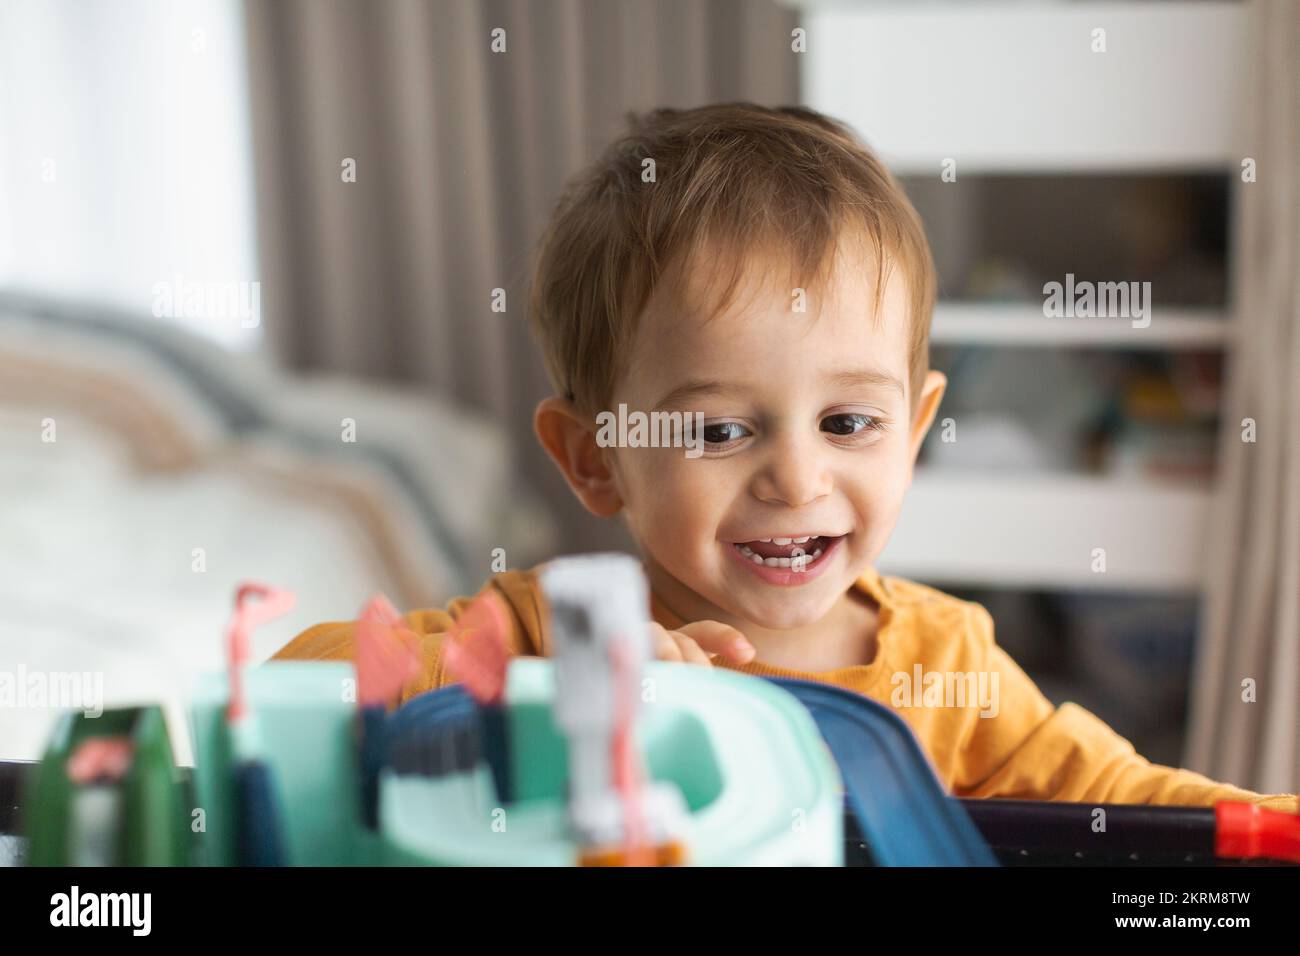 Cheerful adorable little blond haired boy in orange sweater sitting at table and playing with toy while spending time at home Stock Photo